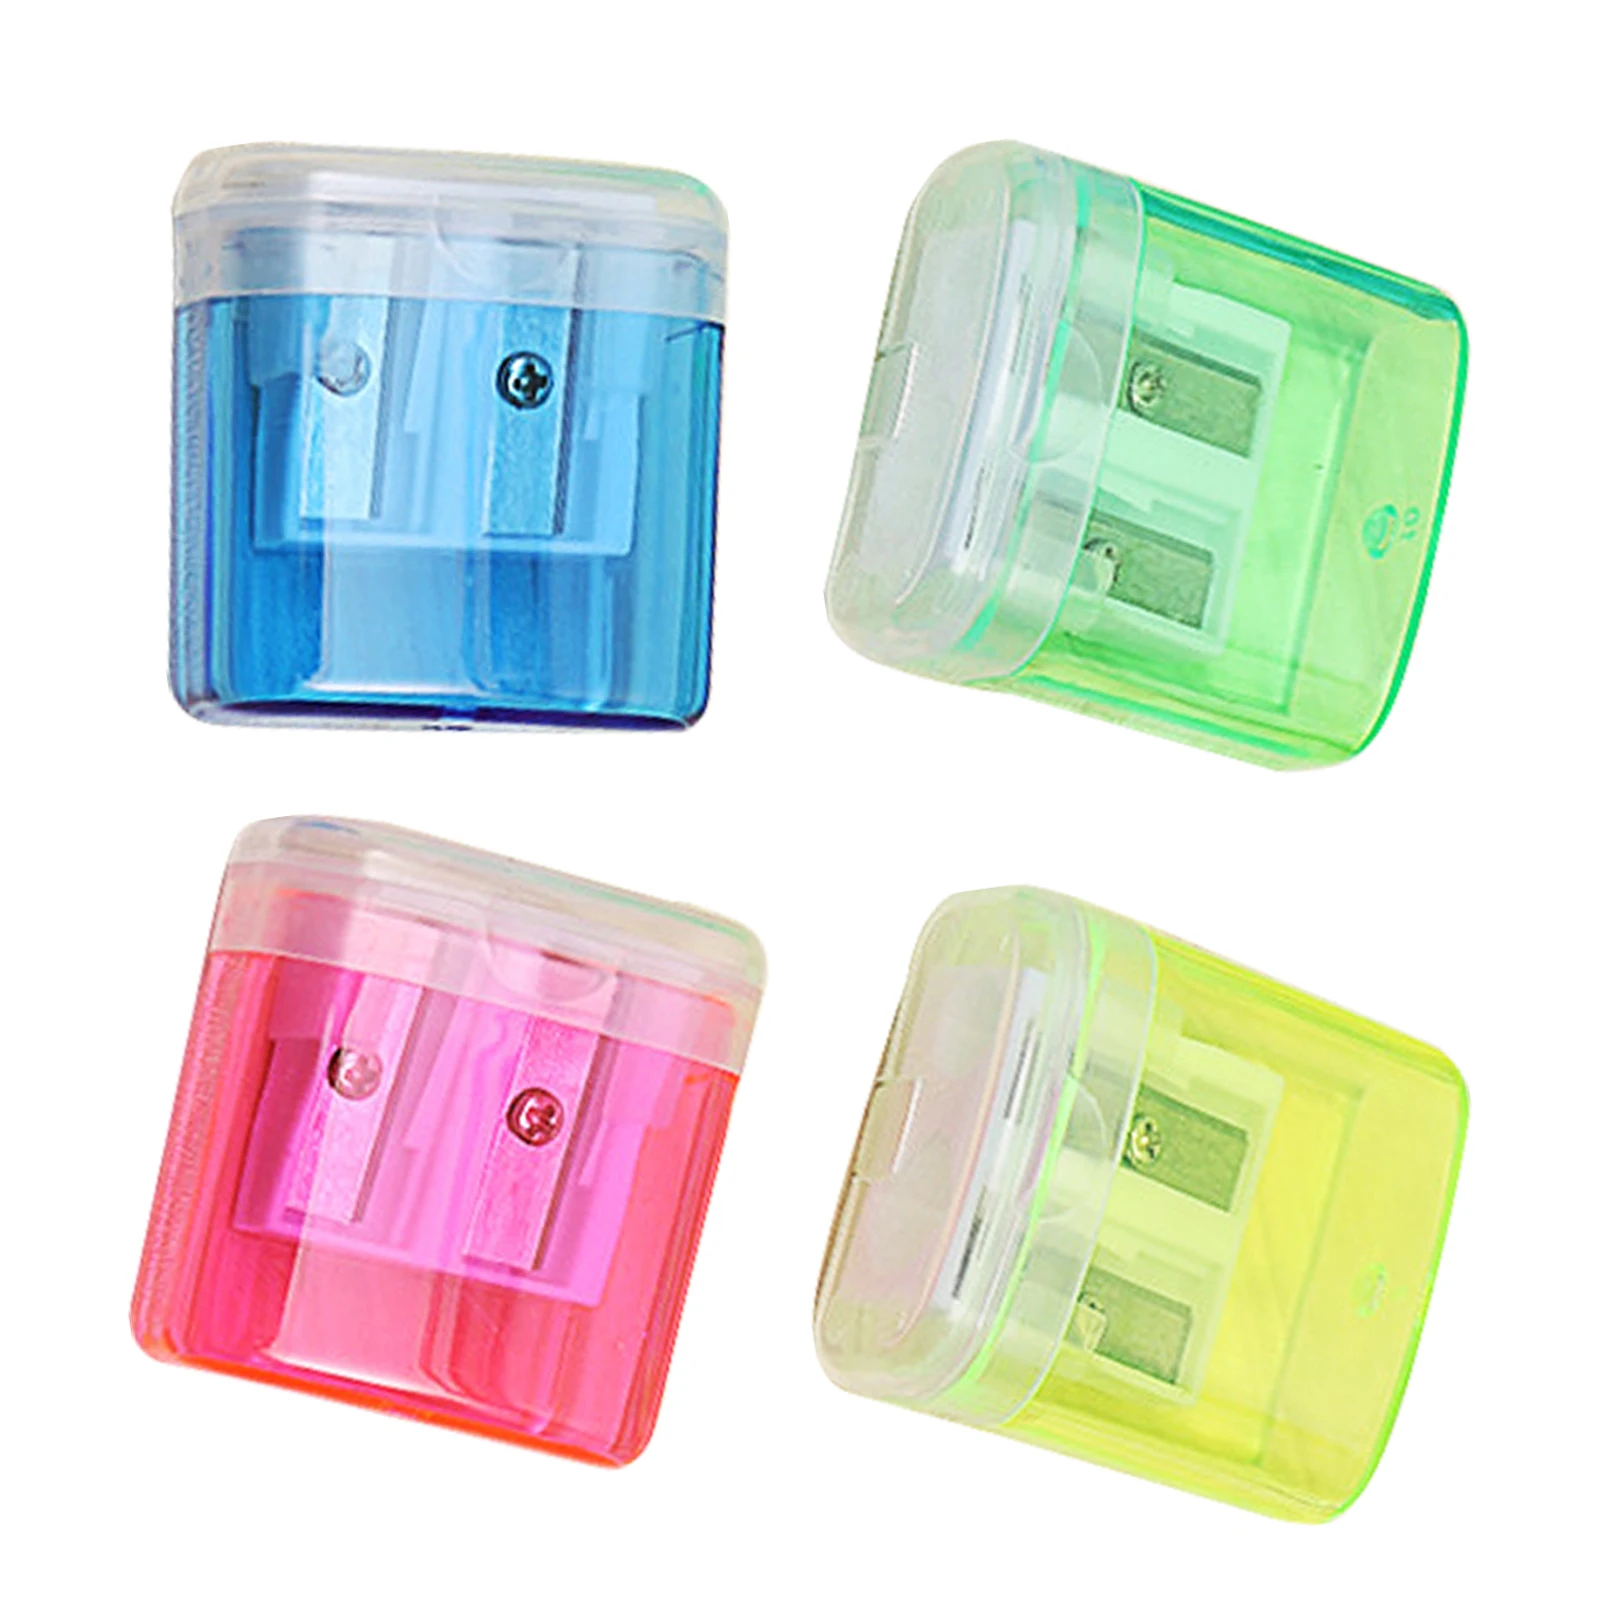 

4pcs Pencil Sharpener Durable Efficient Portable Colourful Double Hole Classroom With Container Schools Easy Use Students Manual